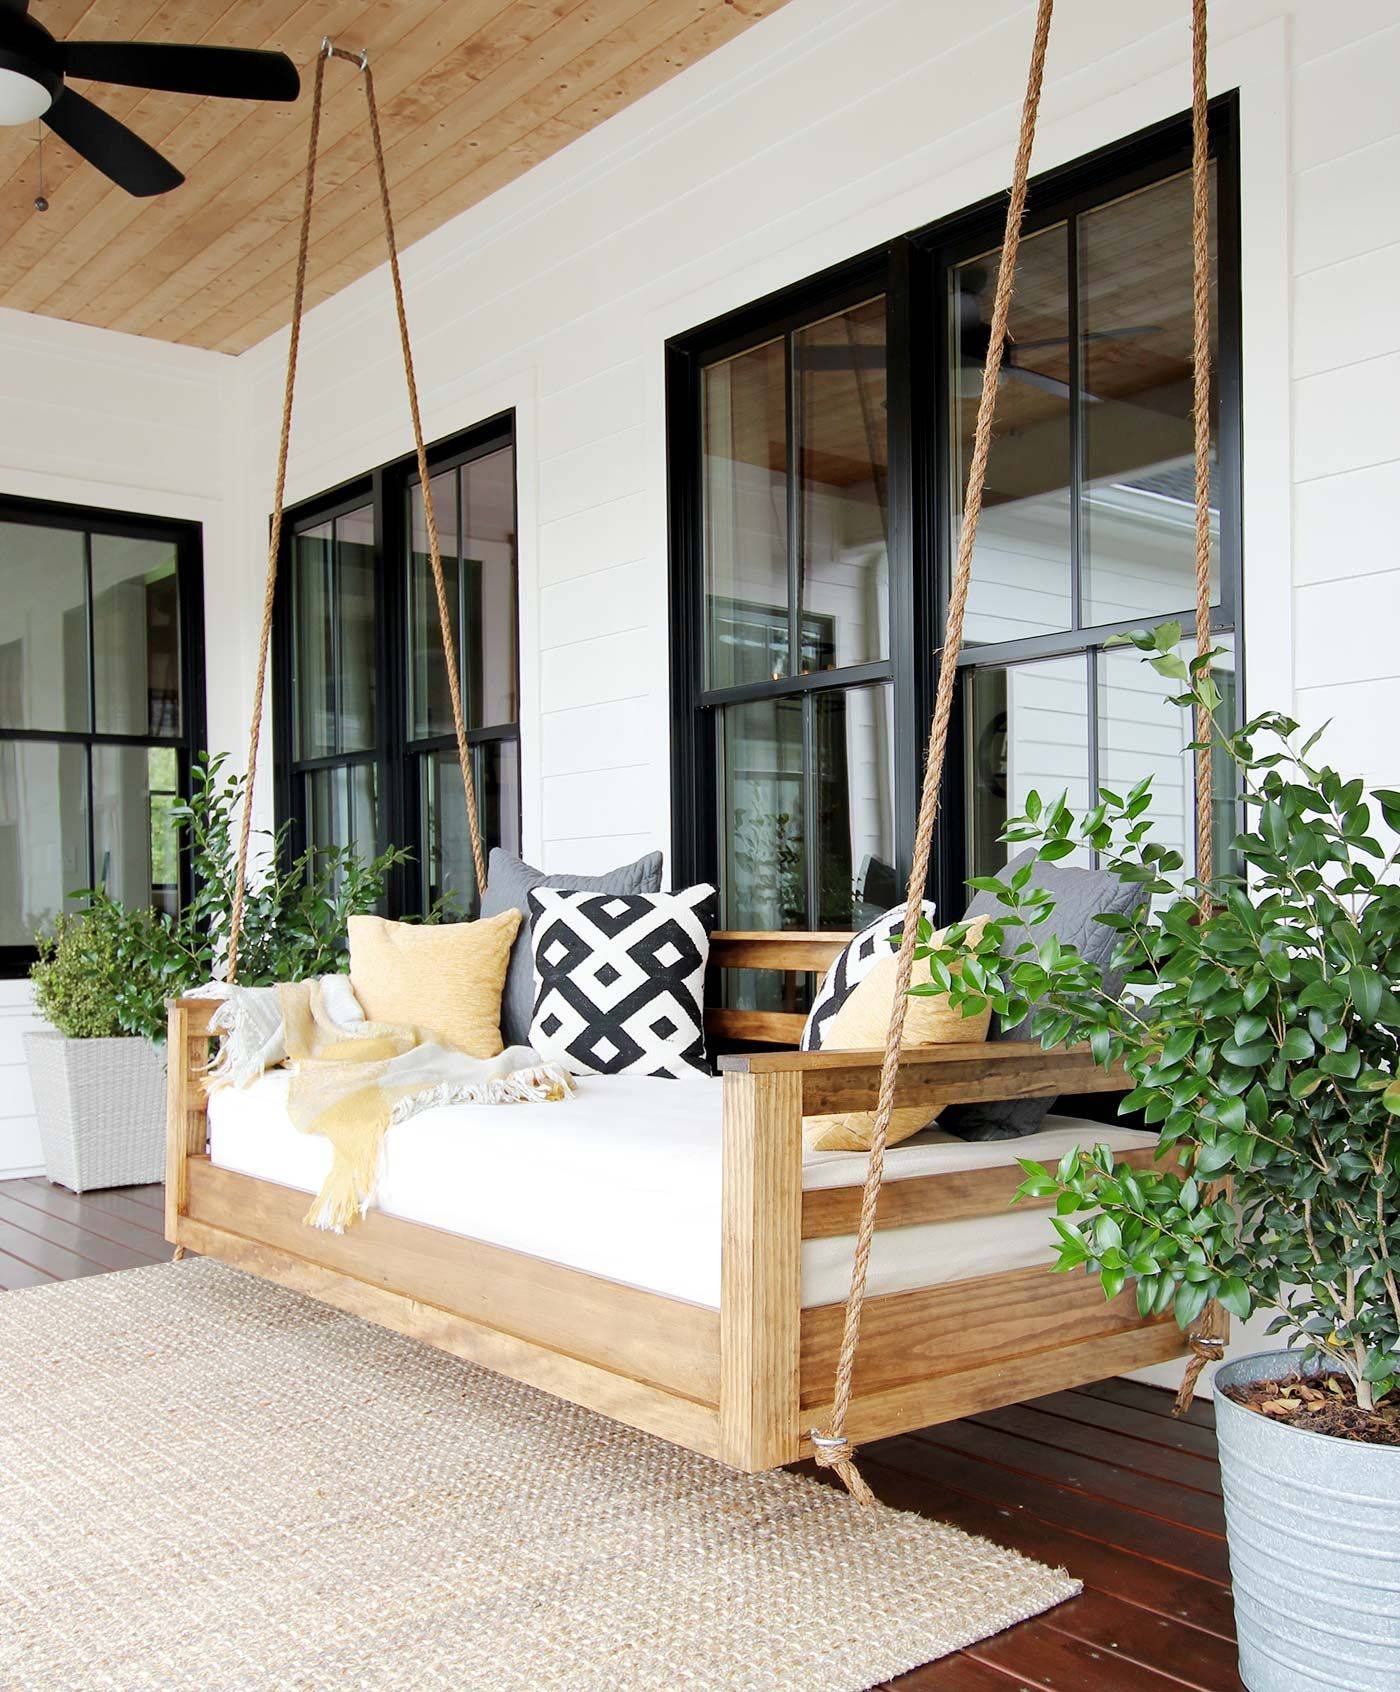 Rustic Chic Modern Swinging Patio Day Bed Alternative Seating